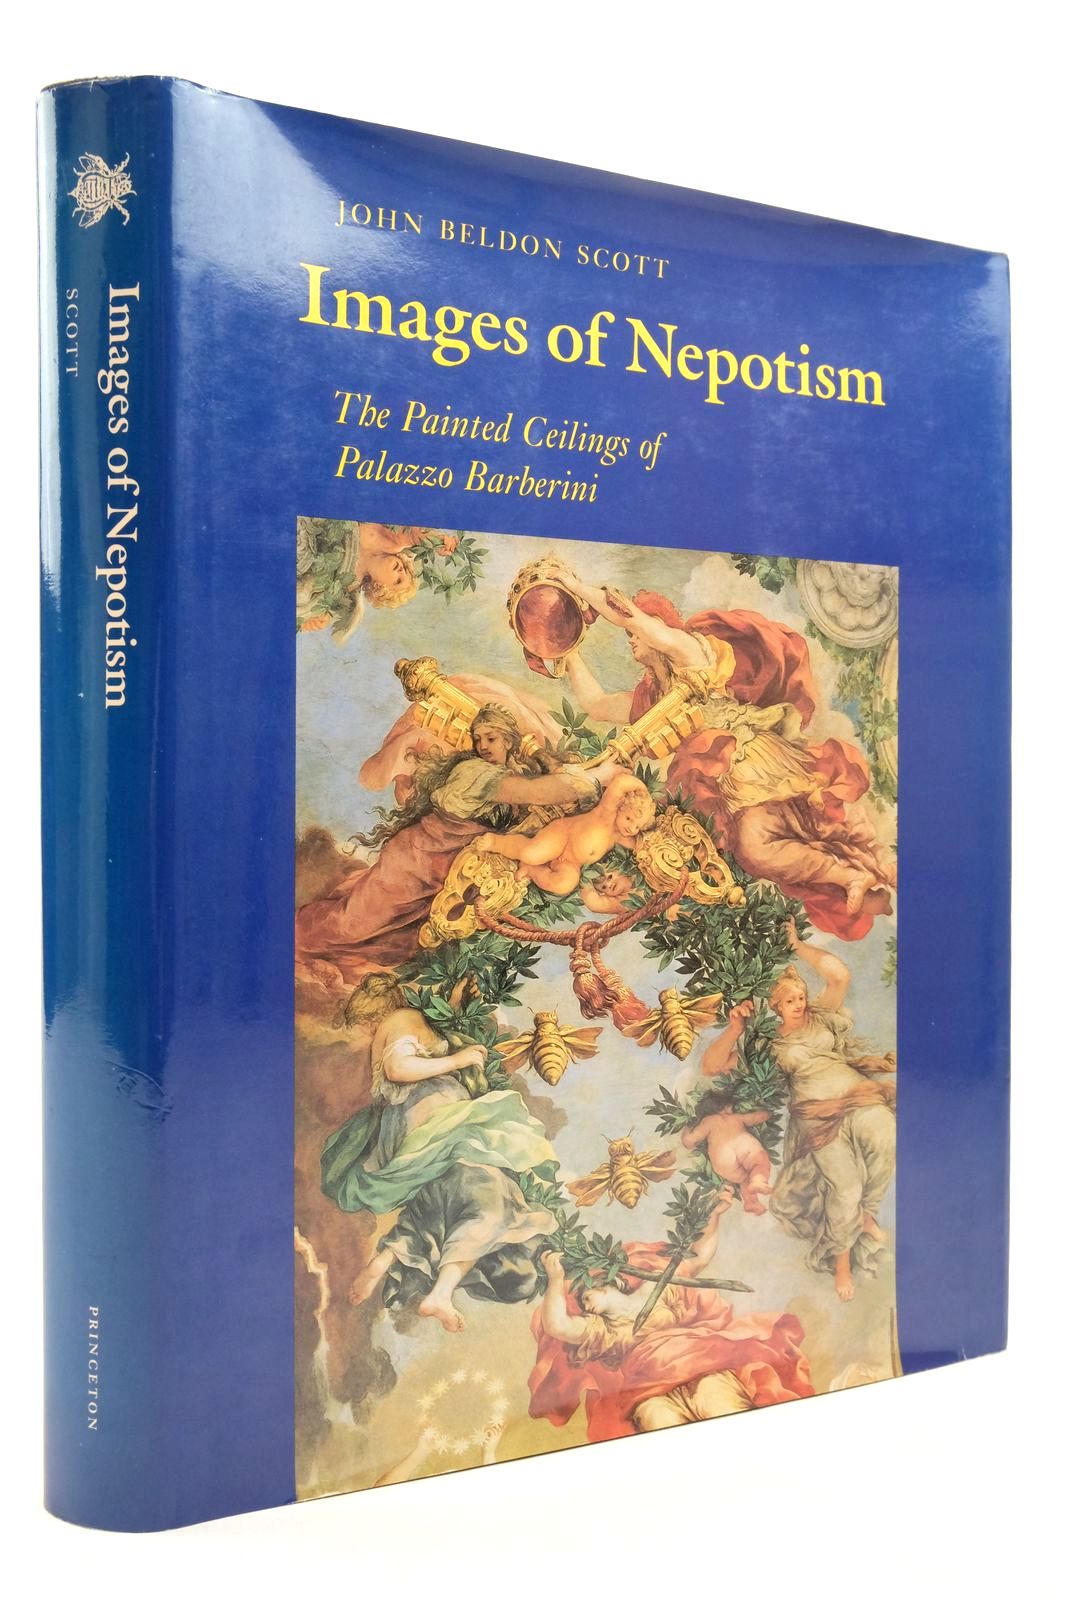 Photo of IMAGES OF NEPOTISM: THE PAINTED CEILINGS OF PALAZZO BARBERINI written by Scott, John Beldon illustrated by Barberini, Palazzo published by Princeton University Press (STOCK CODE: 2138861)  for sale by Stella & Rose's Books